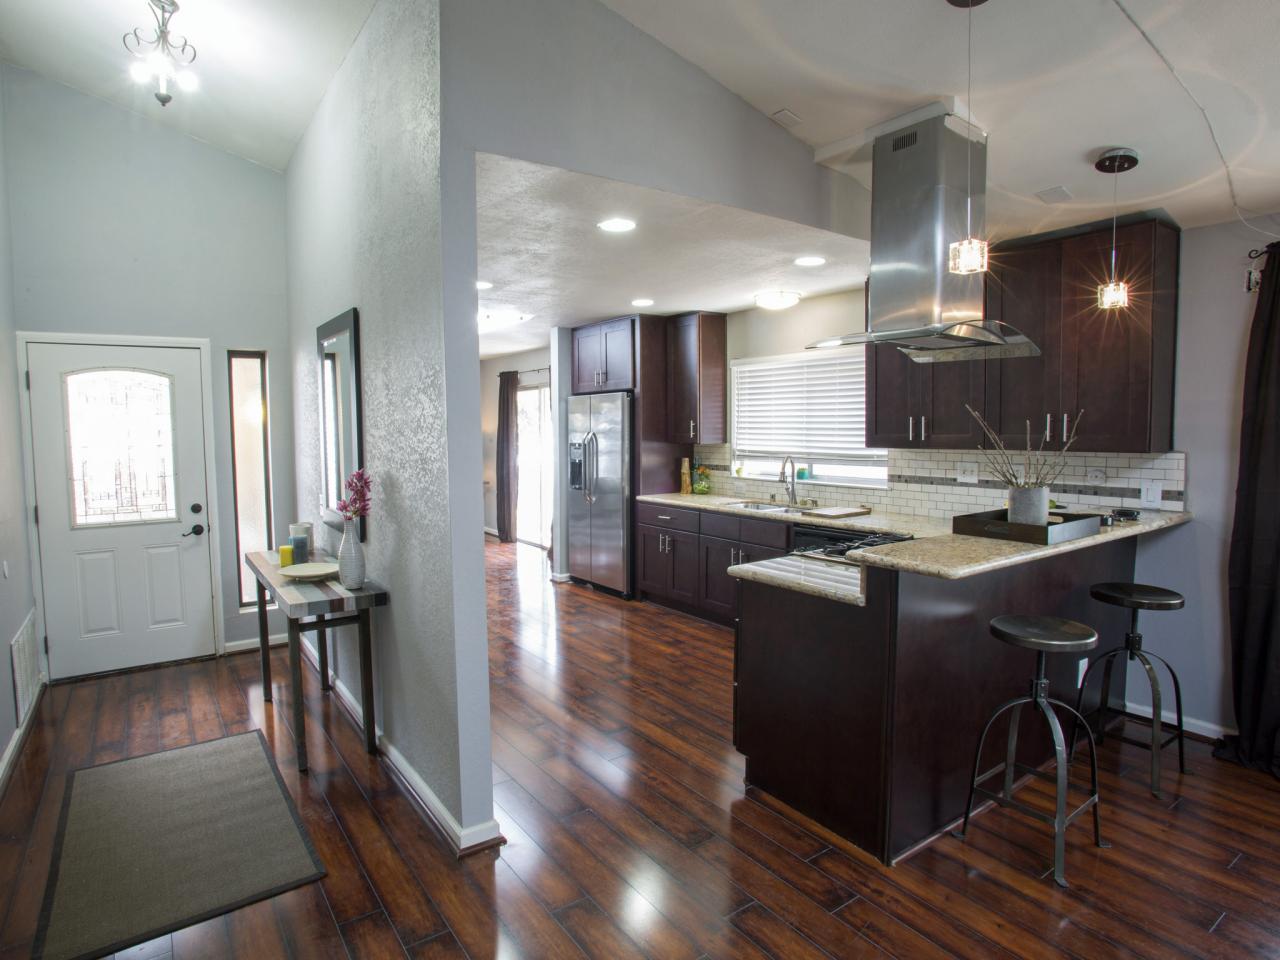 The Pros And Cons Of Laminate Flooring, Best Laminate Flooring Kitchen